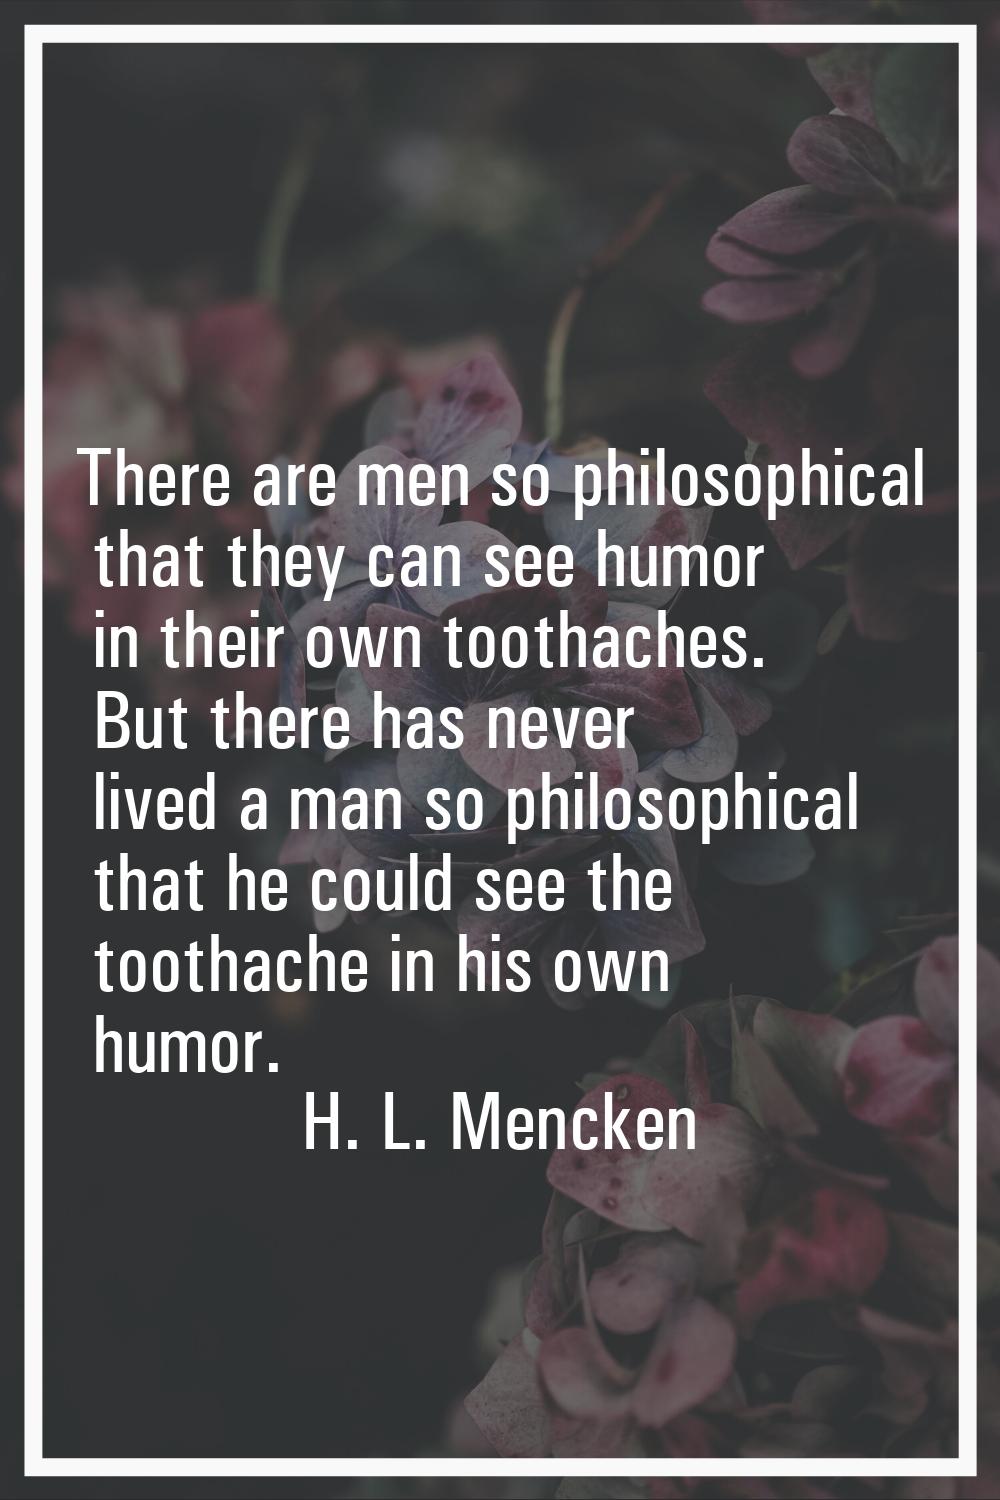 There are men so philosophical that they can see humor in their own toothaches. But there has never